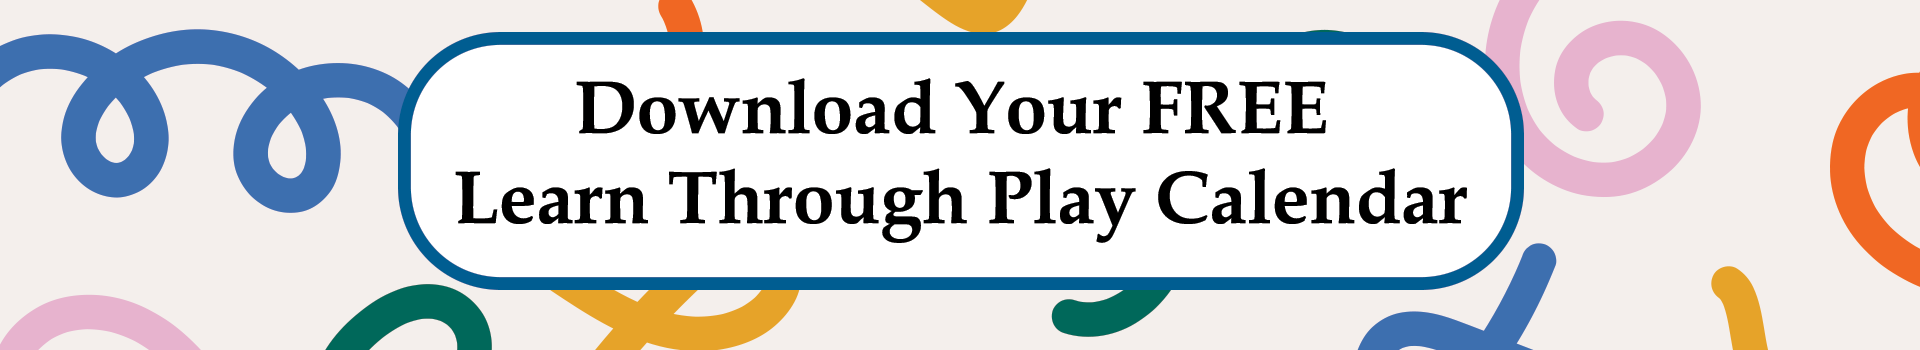 Link to learn through play calendars